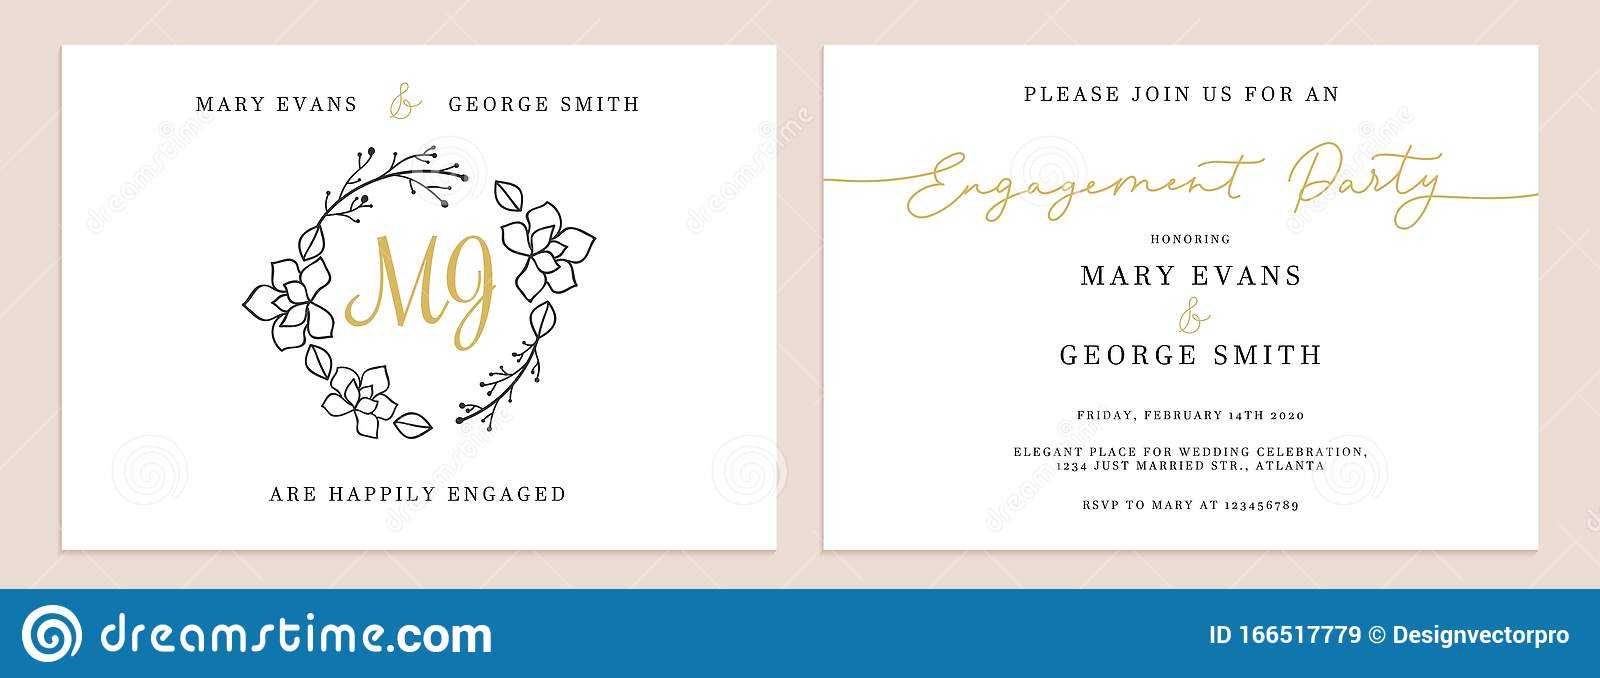 Set Of Wedding Invitation Cards Design Templates Stock With Celebrate It Templates Place Cards